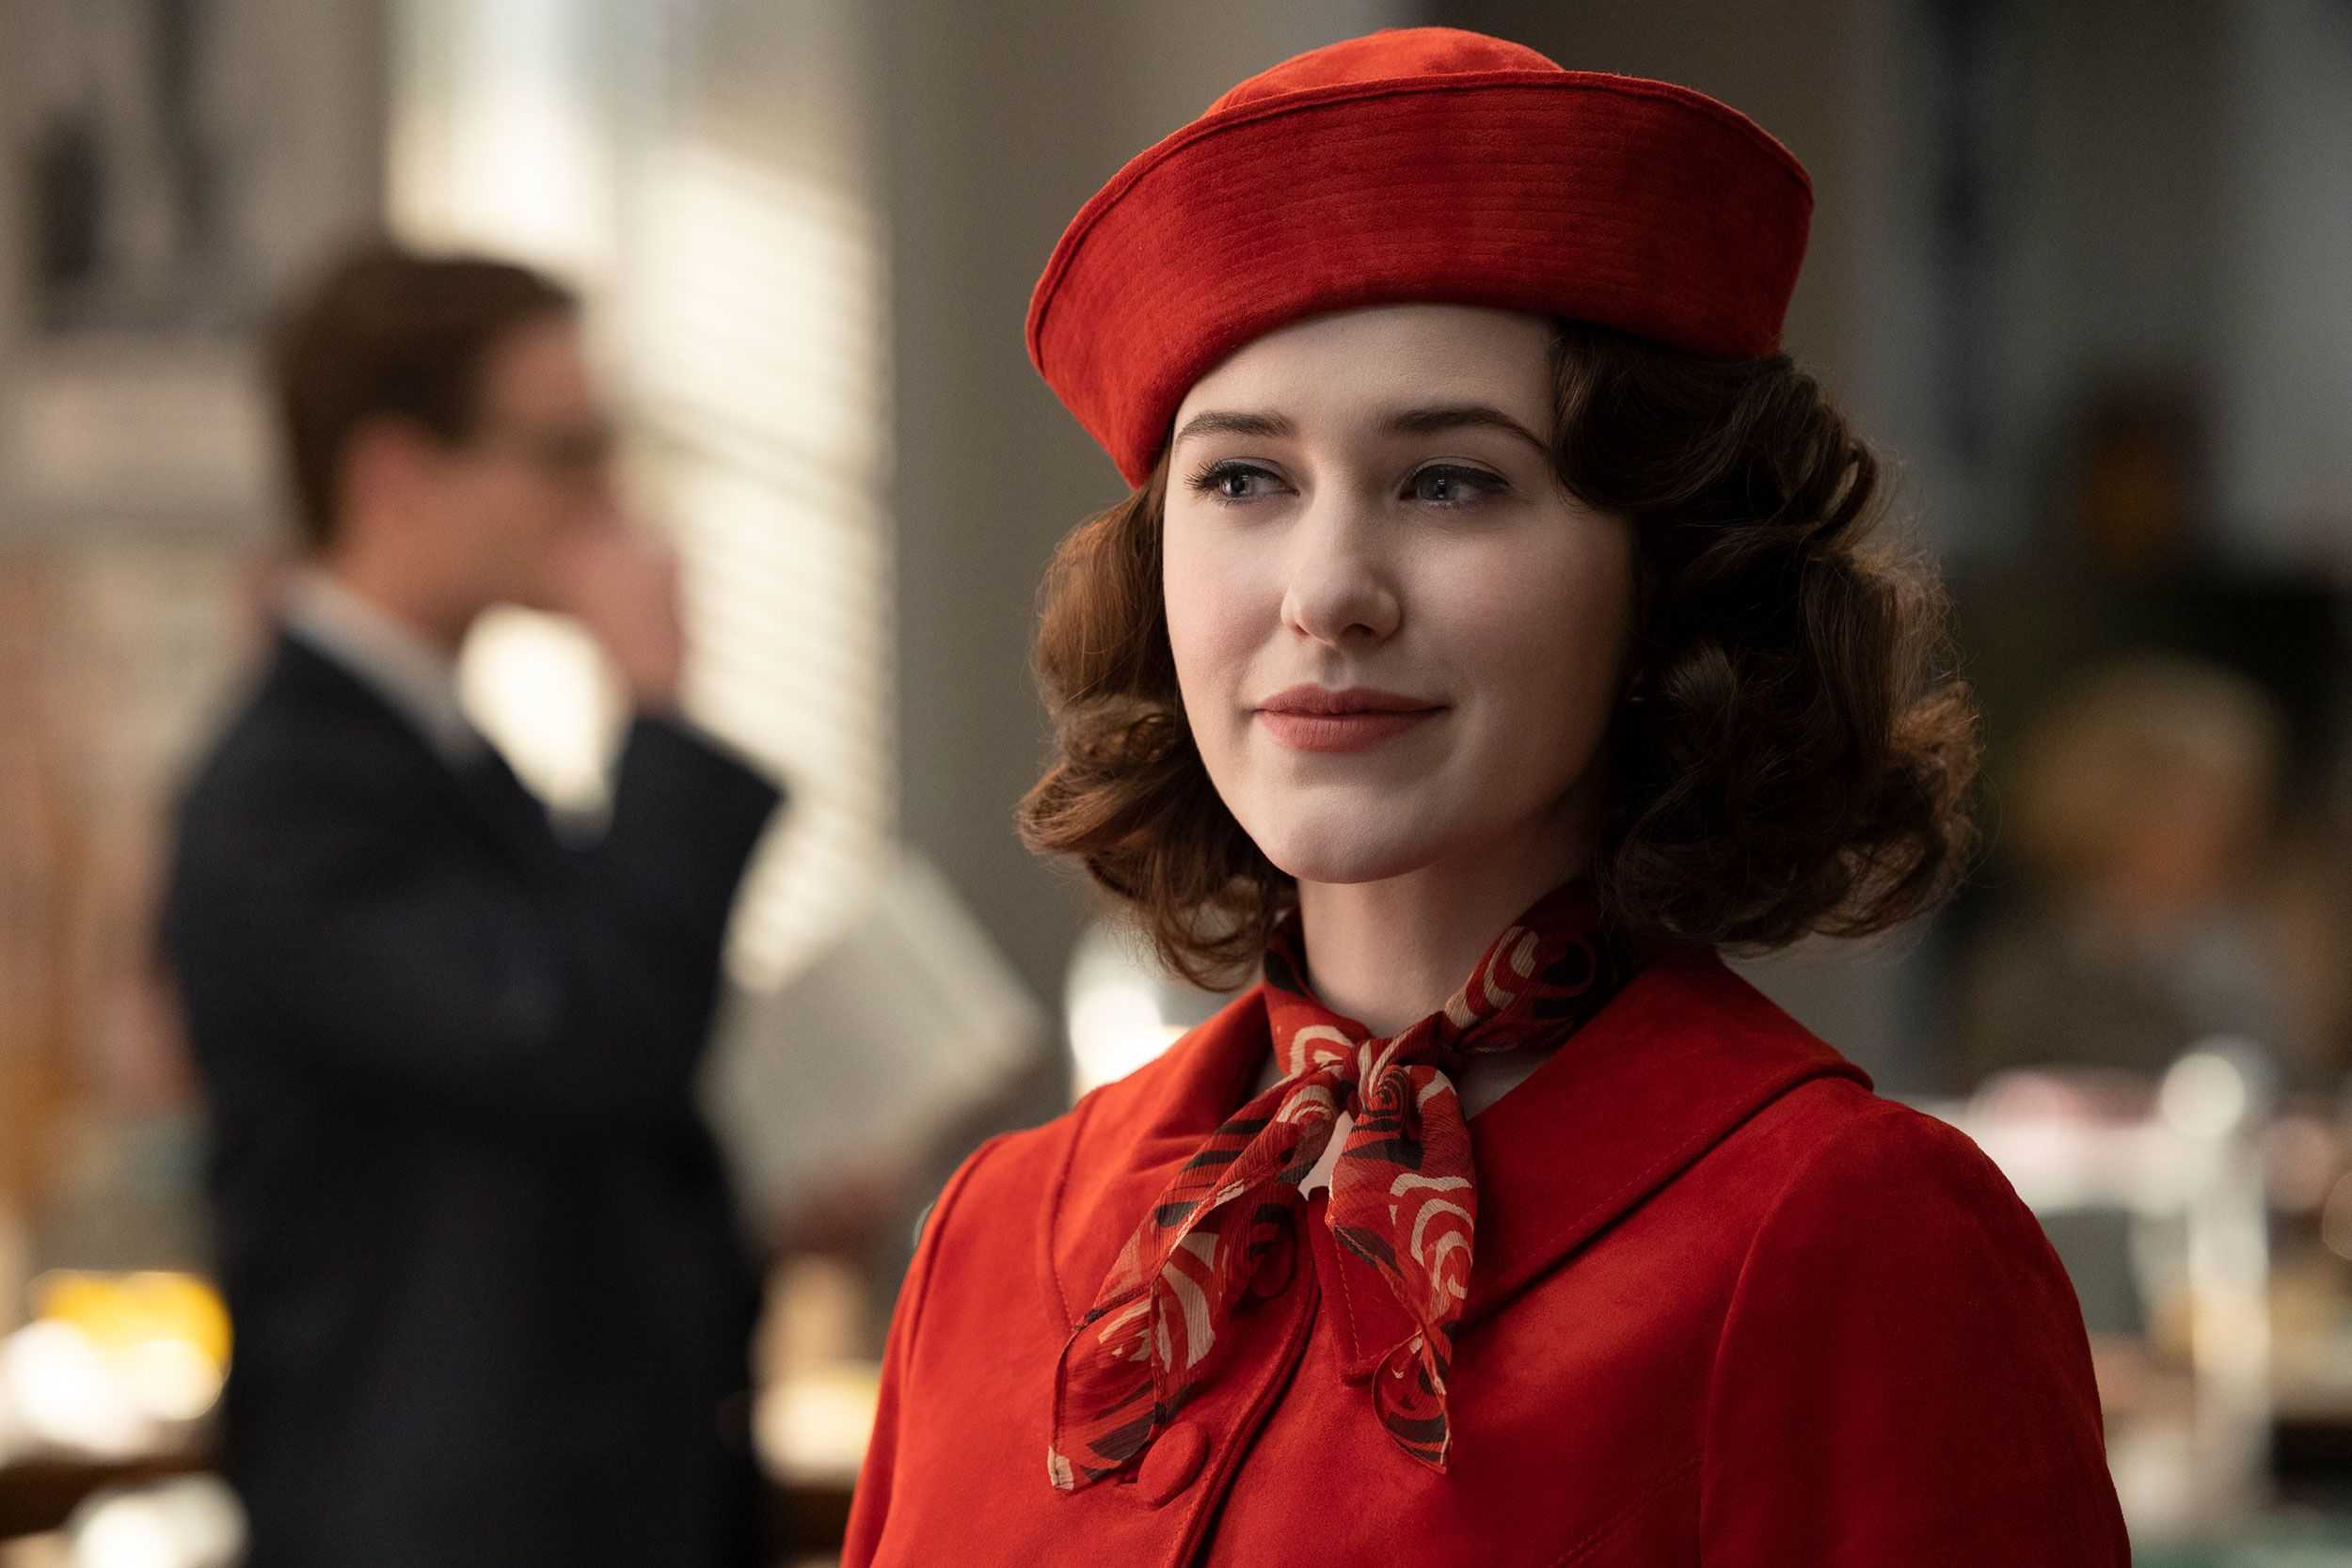 Rachel Brosnahan's journey through stand-up in 'The Marvelous Mrs. Maisel': 'Some giant curveball'